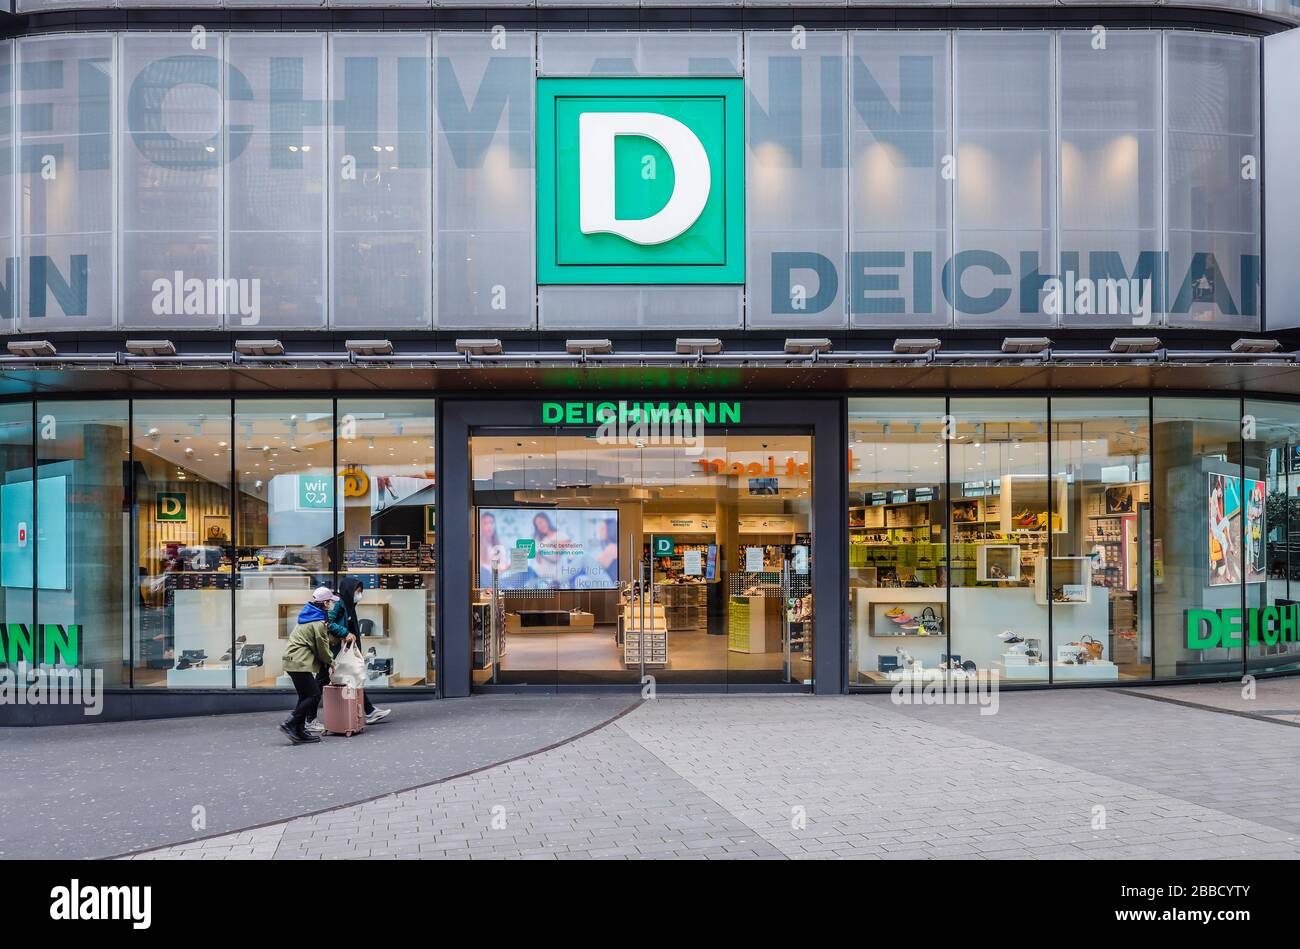 30.03.2020, Essen, Ruhr area, North Rhine-Westphalia, Germany - Closed  Deichmann branch on Limbecker Strasse, Deichmann does not want to pay its  rents Stock Photo - Alamy